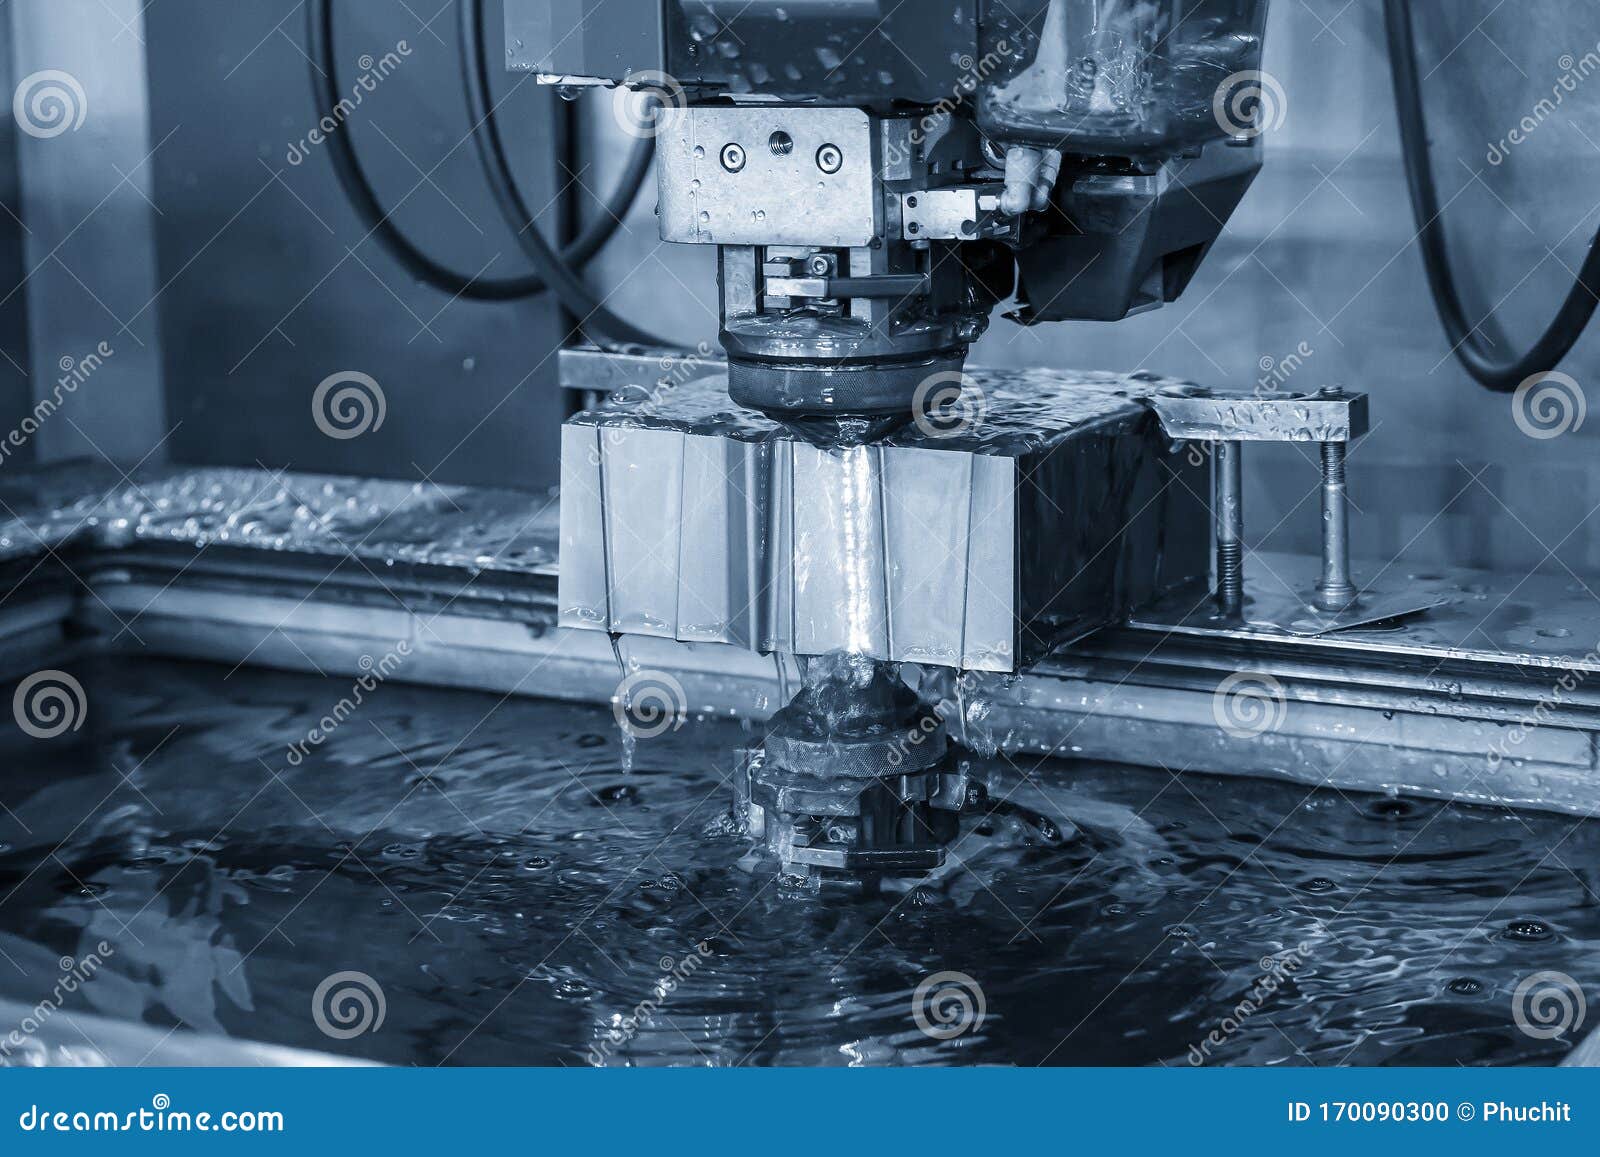 the  wire edm machine cutting the die parts with liquid coolant.